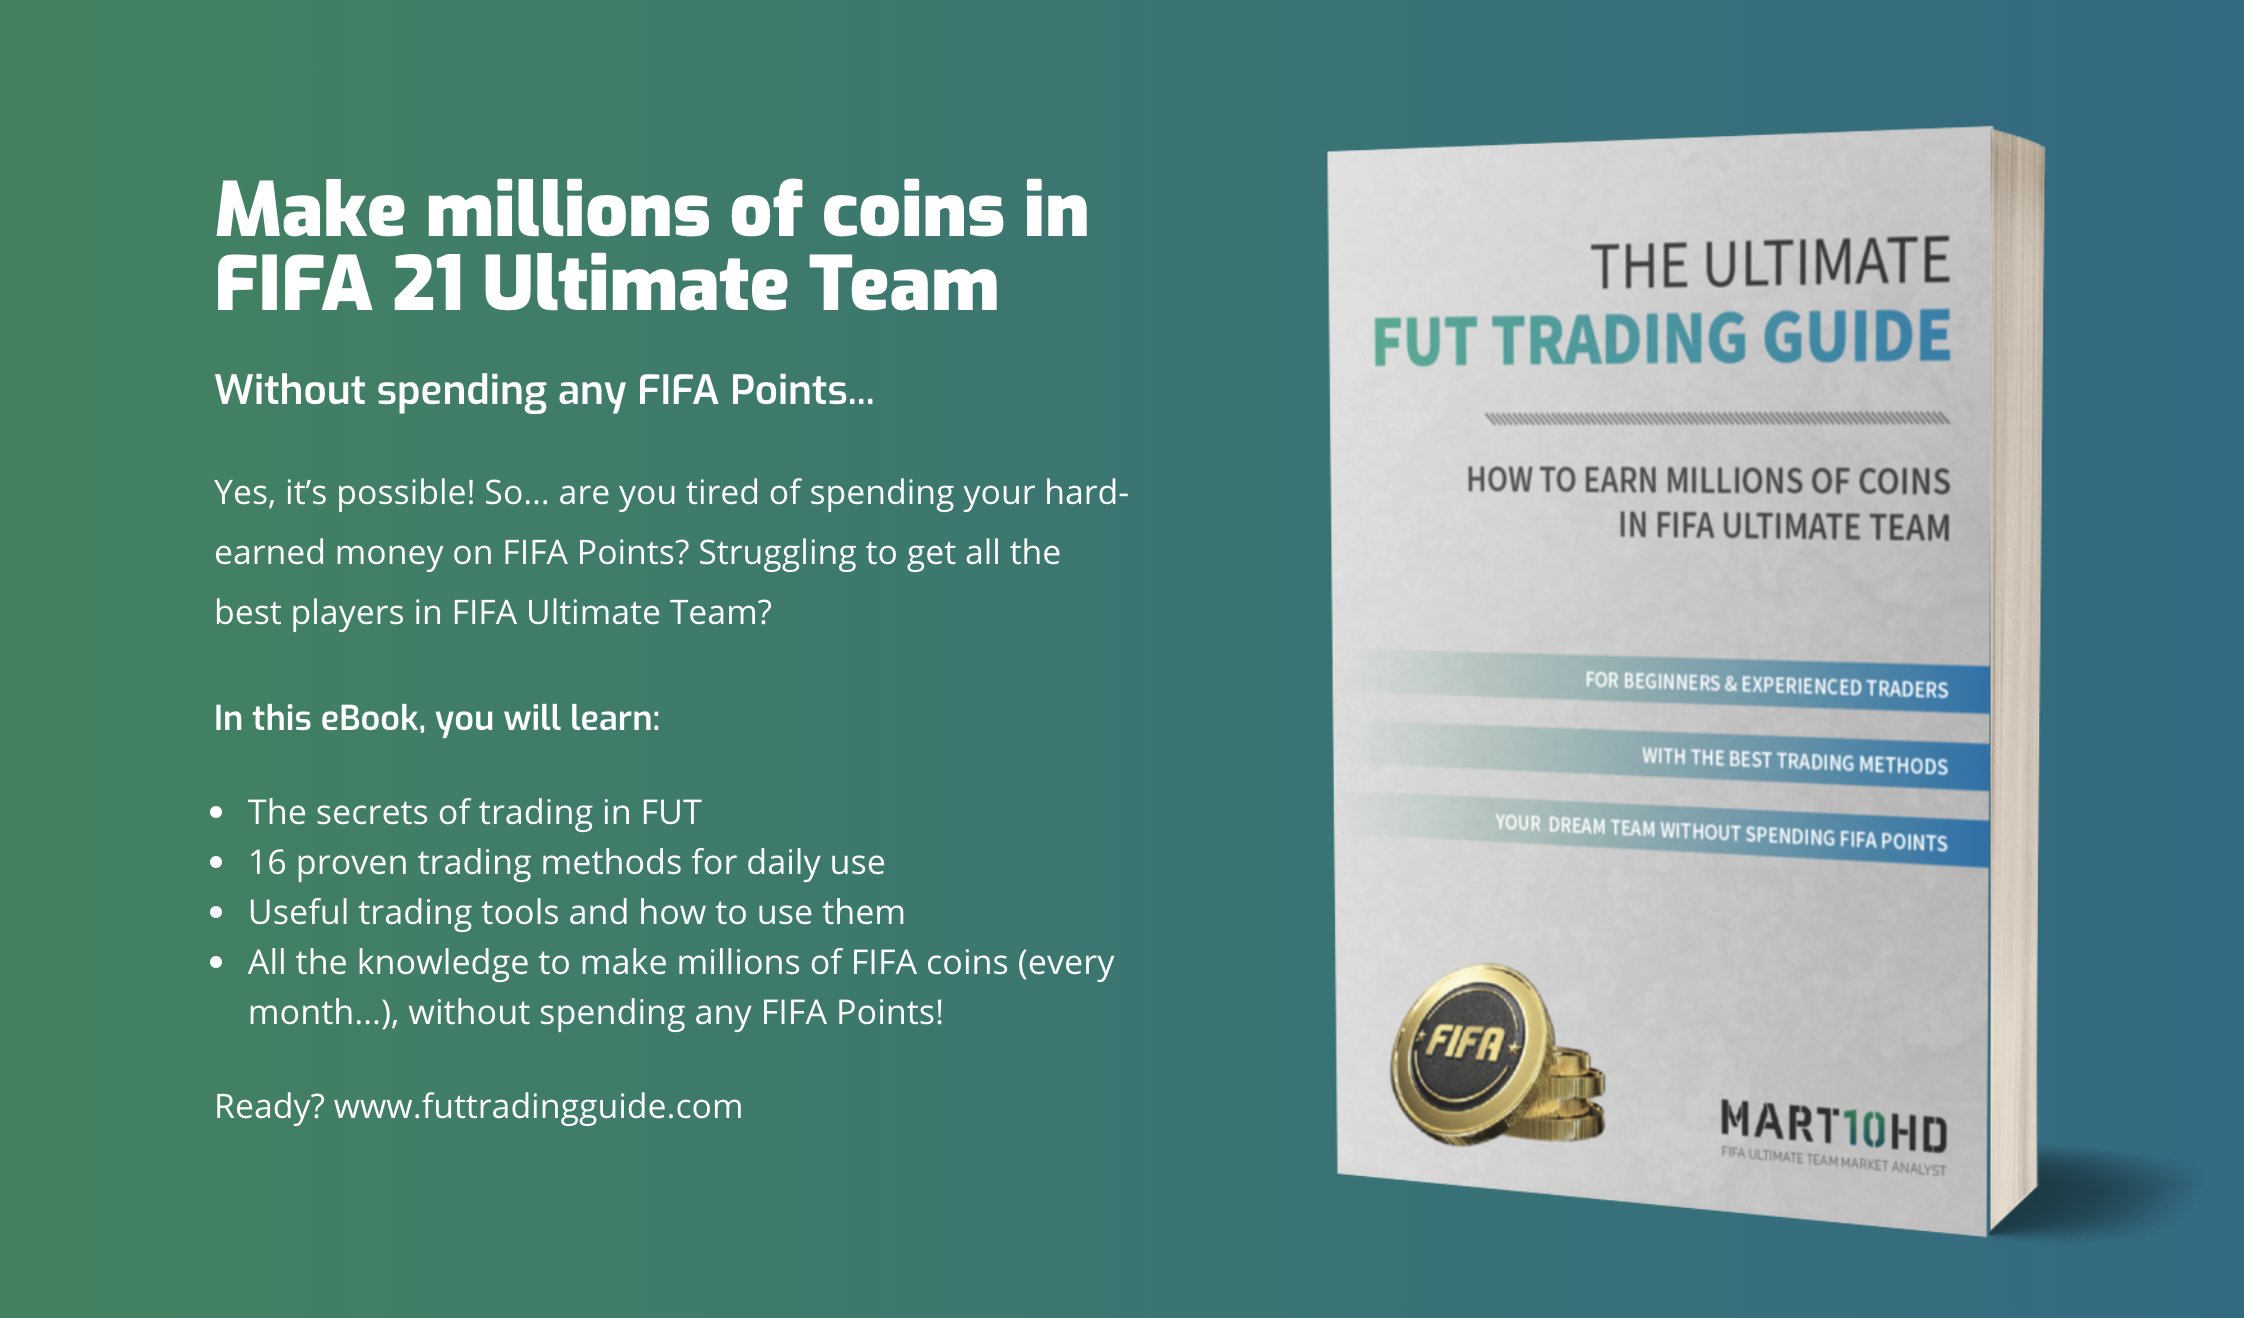 Martin Pa Twitter The Ultimate Fifa21 Fut Trading Guide The Secrets Of Trading In Fut 45 Pages Full Of Content Amp 16 Trading Methods Including Discord Access